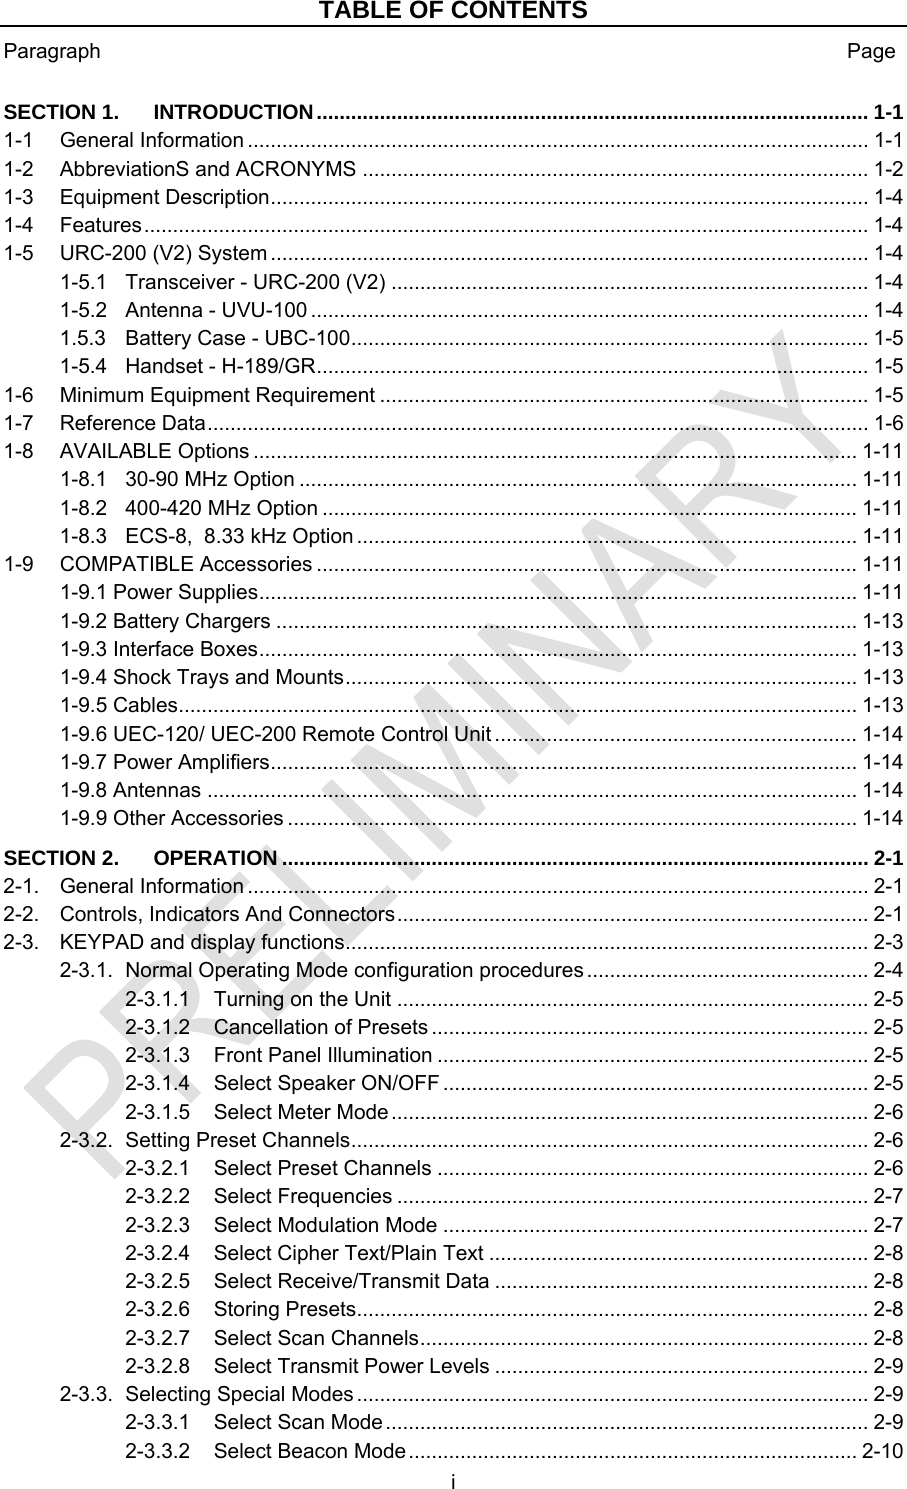 TABLE OF CONTENTS Paragraph  Page i  SECTION 1. ................................................................................................ 1-1 INTRODUCTION1-1 ............................................................................................................ 1-1 General Information1-2 ........................................................................................ 1-2 AbbreviationS and ACRONYMS1-3 ........................................................................................................ 1-4 Equipment Description1-4 .............................................................................................................................. 1-4 Features1-5 ........................................................................................................ 1-4 URC-200 (V2) System1-5.1 ................................................................................... 1-4 Transceiver - URC-200 (V2)1-5.2 ................................................................................................. 1-4 Antenna - UVU-1001.5.3 .......................................................................................... 1-5 Battery Case - UBC-1001-5.4 ................................................................................................ 1-5 Handset - H-189/GR1-6 ..................................................................................... 1-5 Minimum Equipment Requirement1-7 ................................................................................................................... 1-6 Reference Data1-8 ......................................................................................................... 1-11 AVAILABLE Options1-8.1 ................................................................................................. 1-11 30-90 MHz Option1-8.2 ............................................................................................. 1-11 400-420 MHz Option1-8.3 ....................................................................................... 1-11 ECS-8,  8.33 kHz Option1-9 .............................................................................................. 1-11 COMPATIBLE Accessories1-9.1 Power Supplies........................................................................................................ 1-11 1-9.2 Battery Chargers ..................................................................................................... 1-13 1-9.3 Interface Boxes........................................................................................................ 1-13 1-9.4 Shock Trays and Mounts......................................................................................... 1-13 1-9.5 Cables...................................................................................................................... 1-13 1-9.6 UEC-120/ UEC-200 Remote Control Unit ............................................................... 1-14 1-9.7 Power Amplifiers...................................................................................................... 1-14 1-9.8 Antennas ................................................................................................................. 1-14 1-9.9 Other Accessories ................................................................................................... 1-14 SECTION 2. ...................................................................................................... 2-1 OPERATION2-1. ............................................................................................................ 2-1 General Information2-2. .................................................................................. 2-1 Controls, Indicators And Connectors2-3. ........................................................................................... 2-3 KEYPAD and display functions2-3.1. ................................................. 2-4 Normal Operating Mode configuration procedures2-3.1.1 .................................................................................. 2-5 Turning on the Unit2-3.1.2 ............................................................................ 2-5 Cancellation of Presets2-3.1.3 ........................................................................... 2-5 Front Panel Illumination2-3.1.4 .......................................................................... 2-5 Select Speaker ON/OFF2-3.1.5 ................................................................................... 2-6 Select Meter Mode2-3.2. .......................................................................................... 2-6 Setting Preset Channels2-3.2.1 ........................................................................... 2-6 Select Preset Channels2-3.2.2 .................................................................................. 2-7 Select Frequencies2-3.2.3 .......................................................................... 2-7 Select Modulation Mode2-3.2.4 .................................................................. 2-8 Select Cipher Text/Plain Text2-3.2.5 ................................................................. 2-8 Select Receive/Transmit Data2-3.2.6 ......................................................................................... 2-8 Storing Presets2-3.2.7 .............................................................................. 2-8 Select Scan Channels2-3.2.8 ................................................................. 2-9 Select Transmit Power Levels2-3.3. ......................................................................................... 2-9 Selecting Special Modes2-3.3.1 .................................................................................... 2-9 Select Scan Mode2-3.3.2 .............................................................................. 2-10 Select Beacon Mode